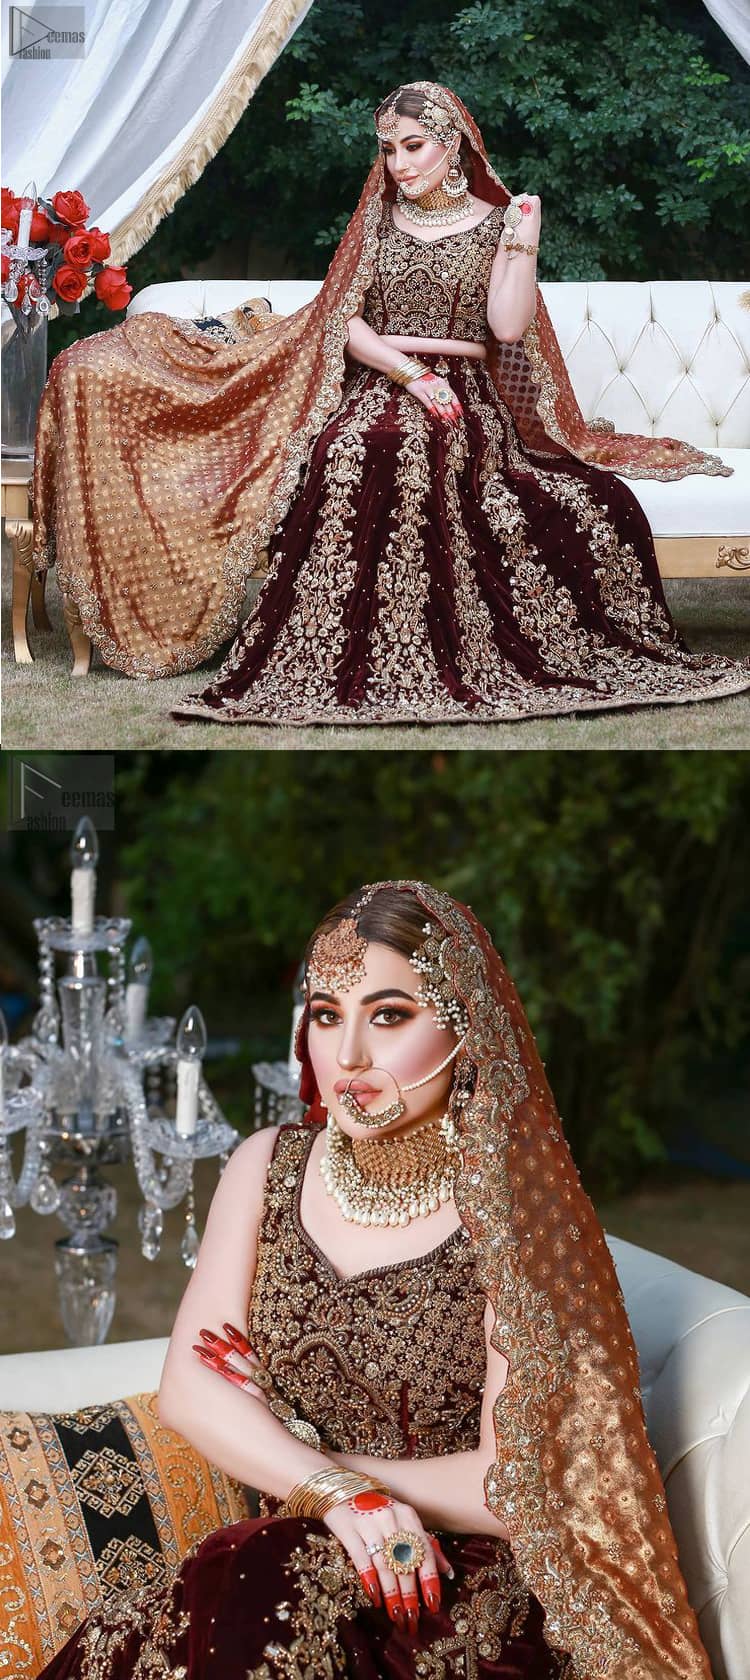 A copper-coloured Dupatta adds a cultural sense to the dress code, making you appear glamourous.